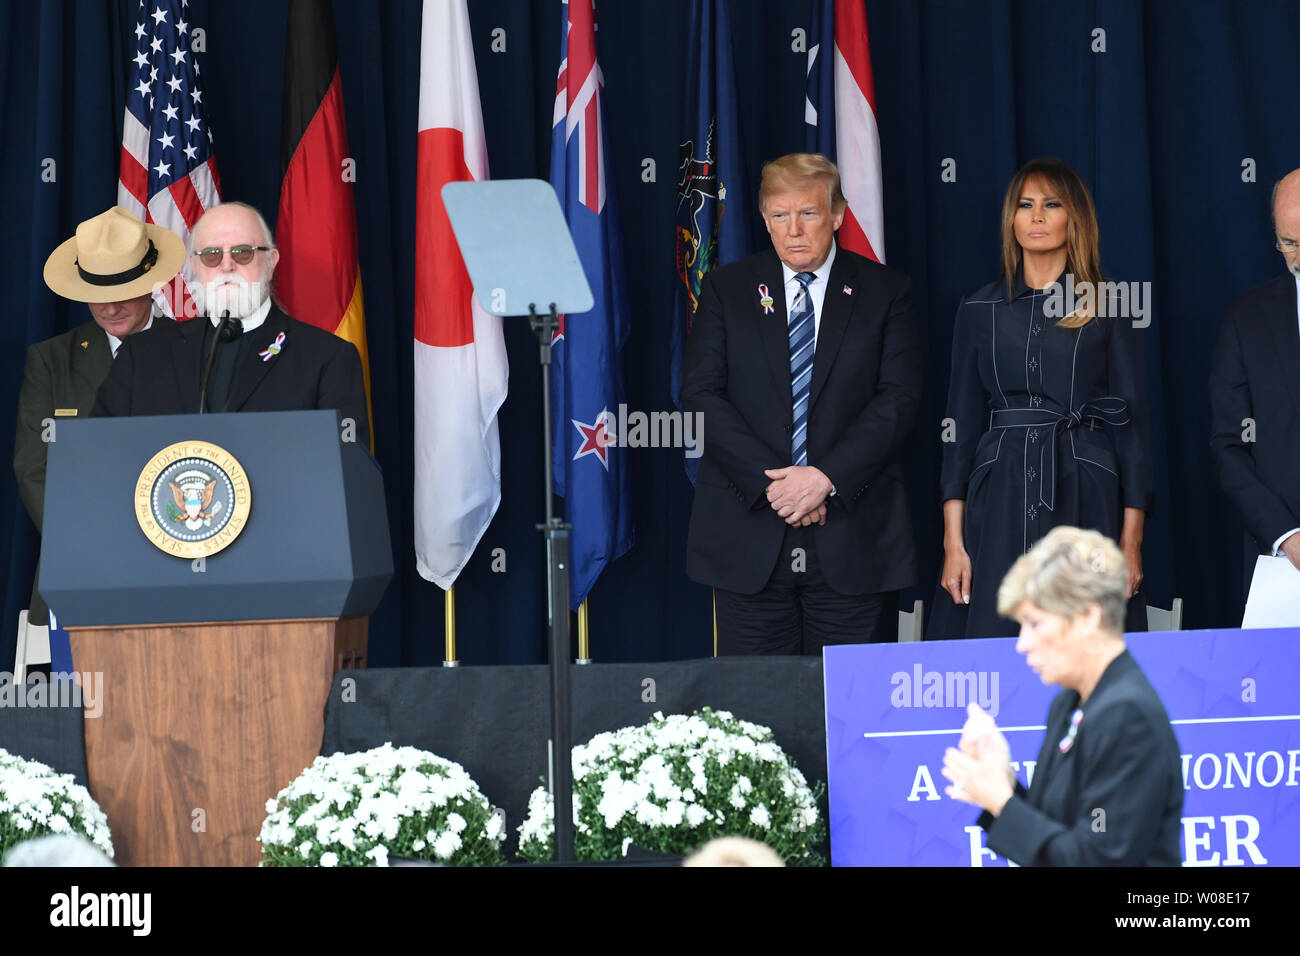 President Donald Trump, First Lady Melania Trump and participants stand for a moment of silence for the victims at a ceremony marking the anniversary of 9/11 at the Flight 93 National Memorial in Shanksville, Pennsylvania on Tuesday, September 11, 2018. It is the 17th anniversary of the crash of United Flight 93 on September 11, 2001.                    Photo by Pat Benic/UPI Stock Photo